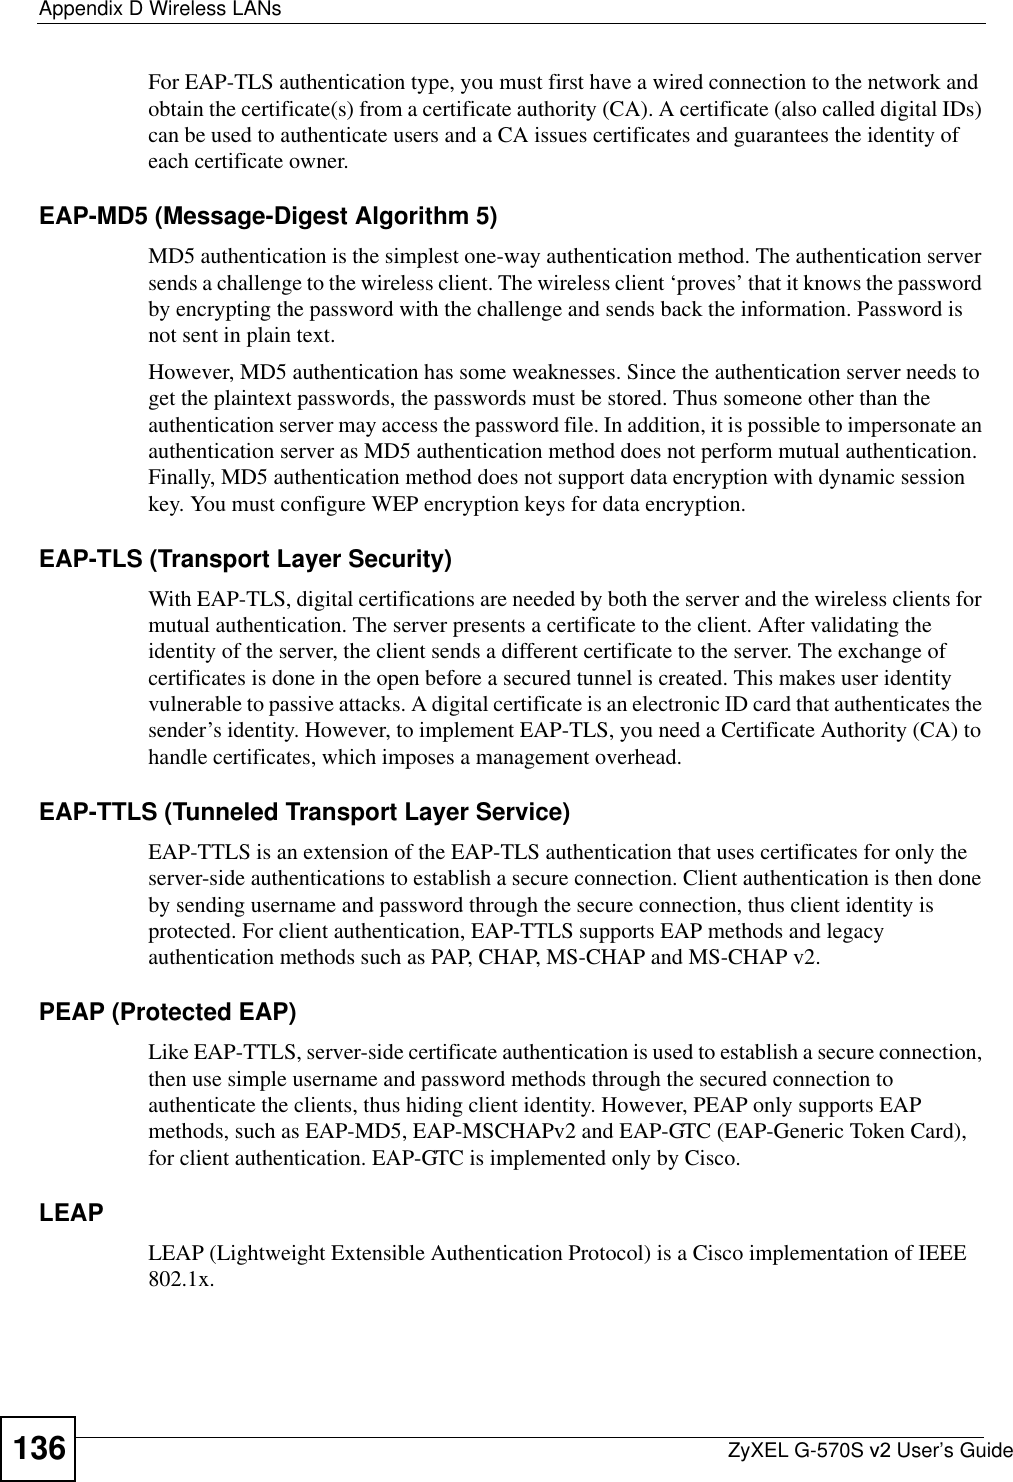 Appendix D Wireless LANsZyXEL G-570S v2 User’s Guide136For EAP-TLS authentication type, you must first have a wired connection to the network and obtain the certificate(s) from a certificate authority (CA). A certificate (also called digital IDs) can be used to authenticate users and a CA issues certificates and guarantees the identity of each certificate owner.EAP-MD5 (Message-Digest Algorithm 5)MD5 authentication is the simplest one-way authentication method. The authentication server sends a challenge to the wireless client. The wireless client ‘proves’ that it knows the password by encrypting the password with the challenge and sends back the information. Password is not sent in plain text. However, MD5 authentication has some weaknesses. Since the authentication server needs to get the plaintext passwords, the passwords must be stored. Thus someone other than the authentication server may access the password file. In addition, it is possible to impersonate an authentication server as MD5 authentication method does not perform mutual authentication. Finally, MD5 authentication method does not support data encryption with dynamic session key. You must configure WEP encryption keys for data encryption. EAP-TLS (Transport Layer Security)With EAP-TLS, digital certifications are needed by both the server and the wireless clients for mutual authentication. The server presents a certificate to the client. After validating the identity of the server, the client sends a different certificate to the server. The exchange of certificates is done in the open before a secured tunnel is created. This makes user identity vulnerable to passive attacks. A digital certificate is an electronic ID card that authenticates the sender’s identity. However, to implement EAP-TLS, you need a Certificate Authority (CA) to handle certificates, which imposes a management overhead. EAP-TTLS (Tunneled Transport Layer Service) EAP-TTLS is an extension of the EAP-TLS authentication that uses certificates for only the server-side authentications to establish a secure connection. Client authentication is then done by sending username and password through the secure connection, thus client identity is protected. For client authentication, EAP-TTLS supports EAP methods and legacy authentication methods such as PAP, CHAP, MS-CHAP and MS-CHAP v2. PEAP (Protected EAP)Like EAP-TTLS, server-side certificate authentication is used to establish a secure connection, then use simple username and password methods through the secured connection to authenticate the clients, thus hiding client identity. However, PEAP only supports EAP methods, such as EAP-MD5, EAP-MSCHAPv2 and EAP-GTC (EAP-Generic Token Card), for client authentication. EAP-GTC is implemented only by Cisco.LEAPLEAP (Lightweight Extensible Authentication Protocol) is a Cisco implementation of IEEE 802.1x. 